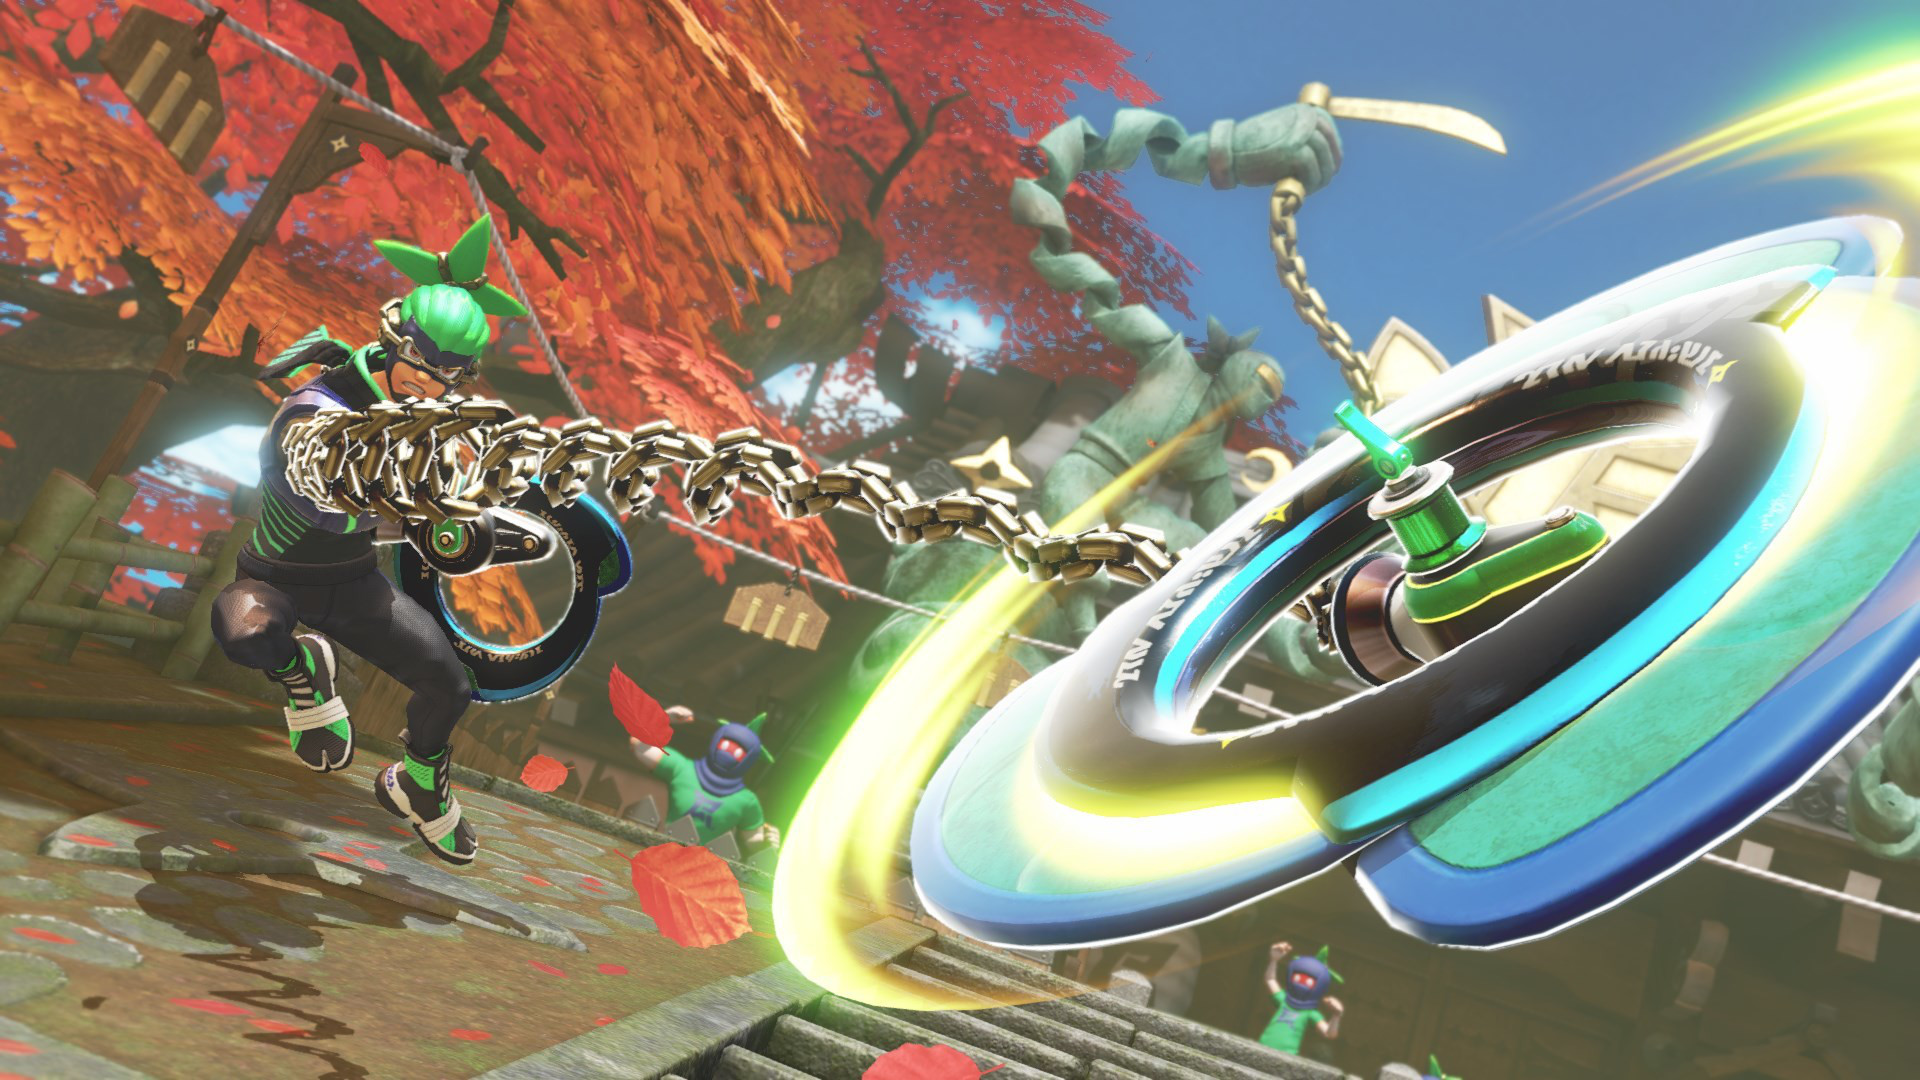 Update 3.0 for Arms Brings Controller Remapping